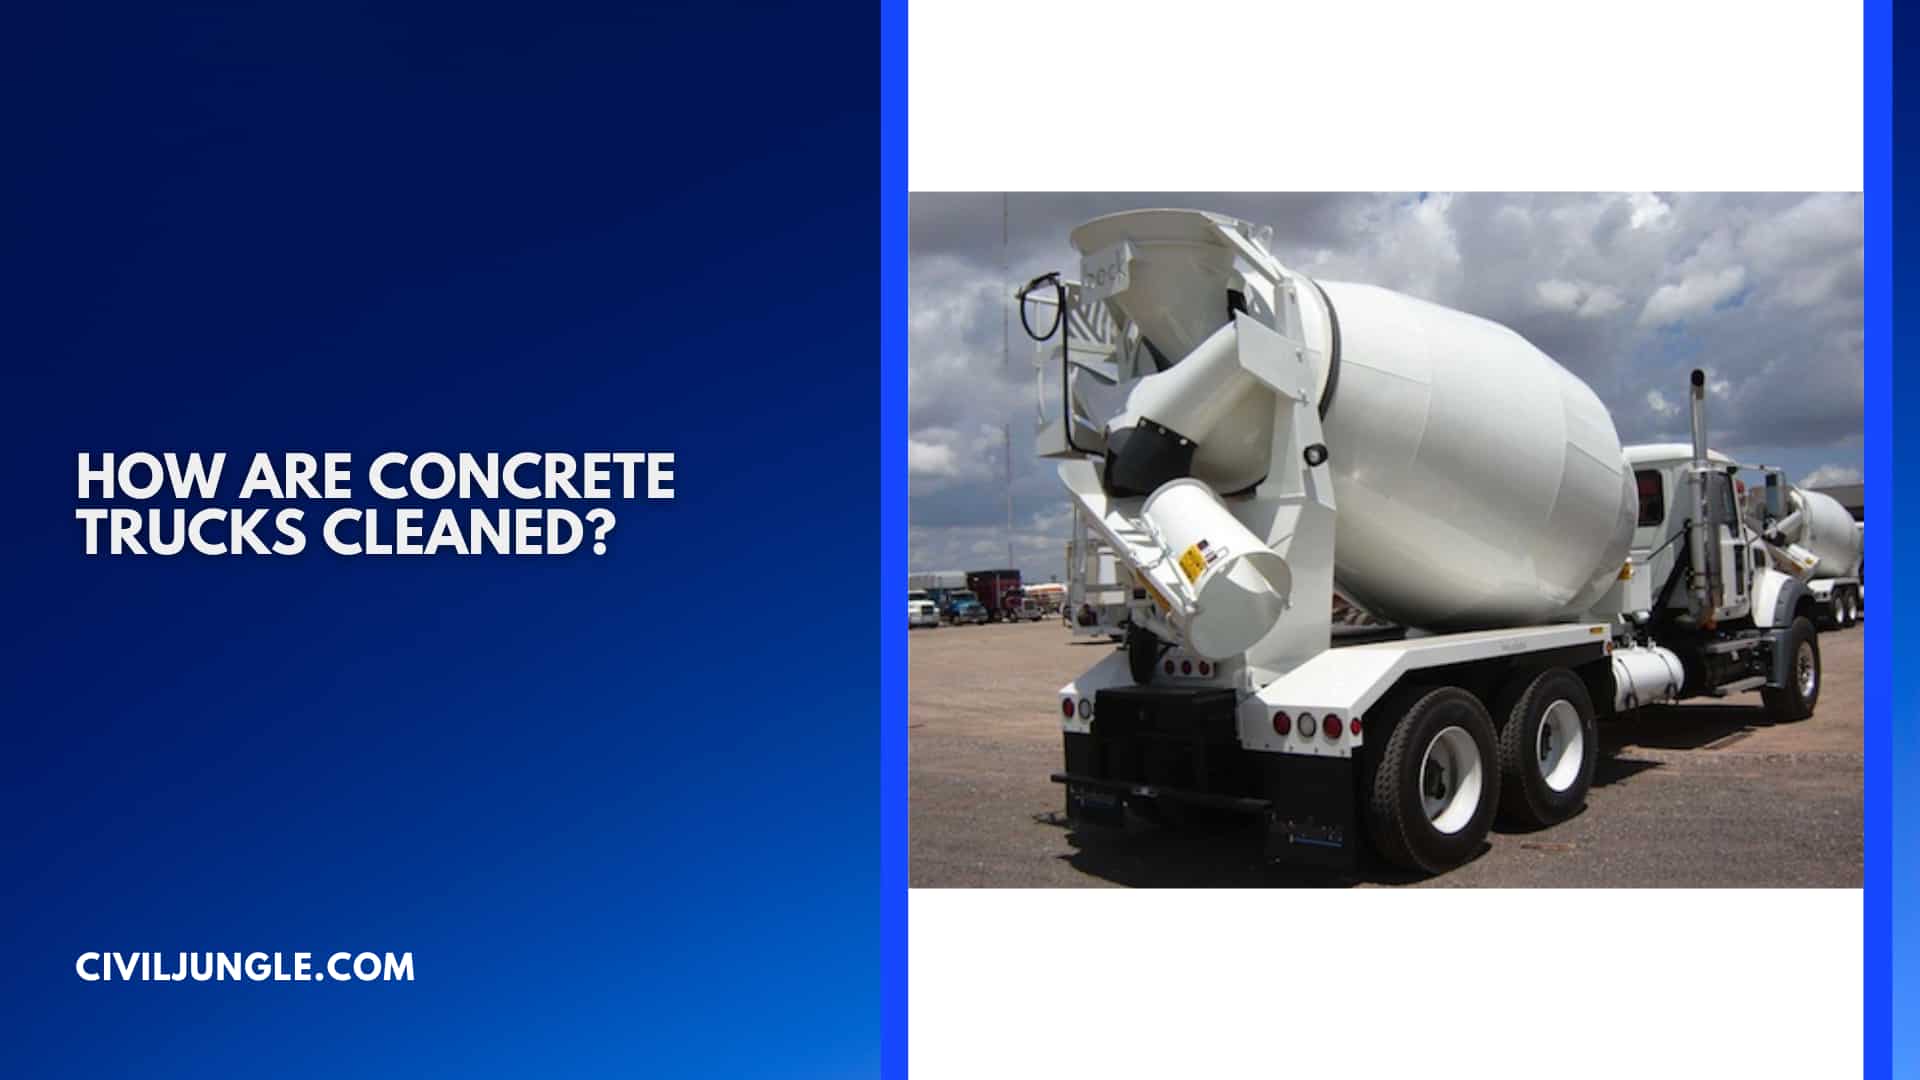 How are Concrete Trucks Cleaned?